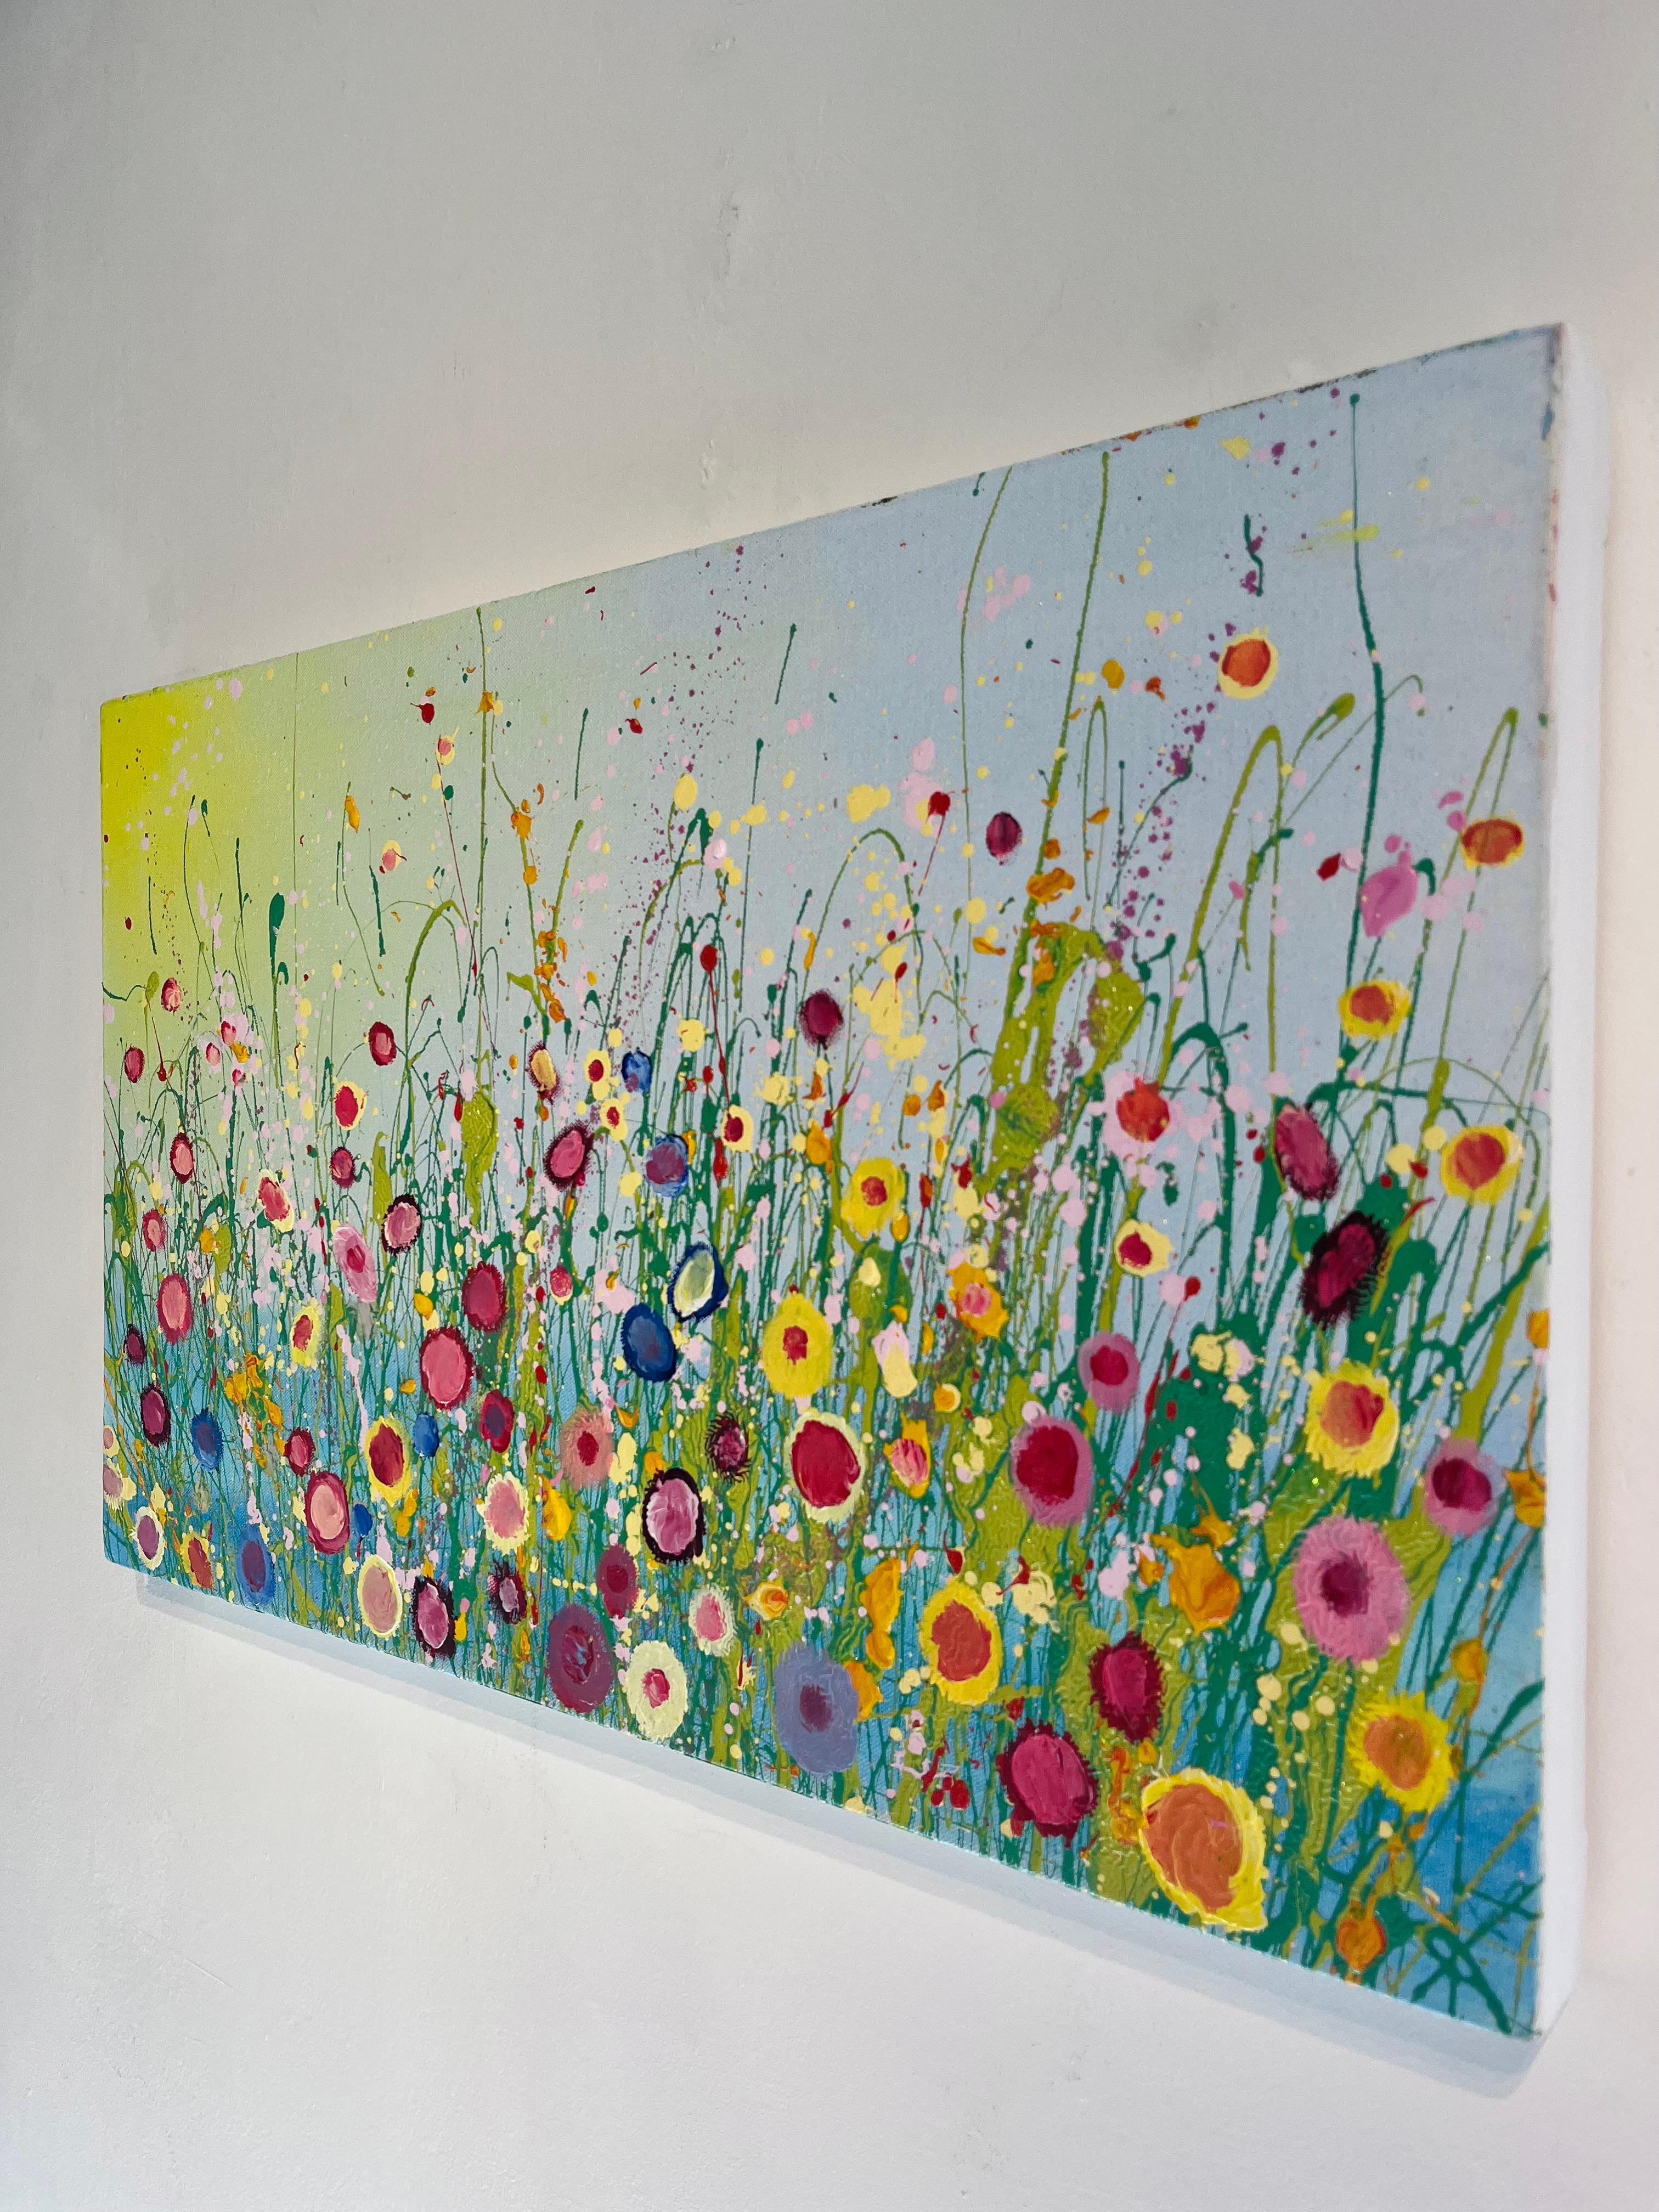 Rainbows of Love-original floral abstract landscape painting-contemporary Art - Painting by Yvonne Coomber